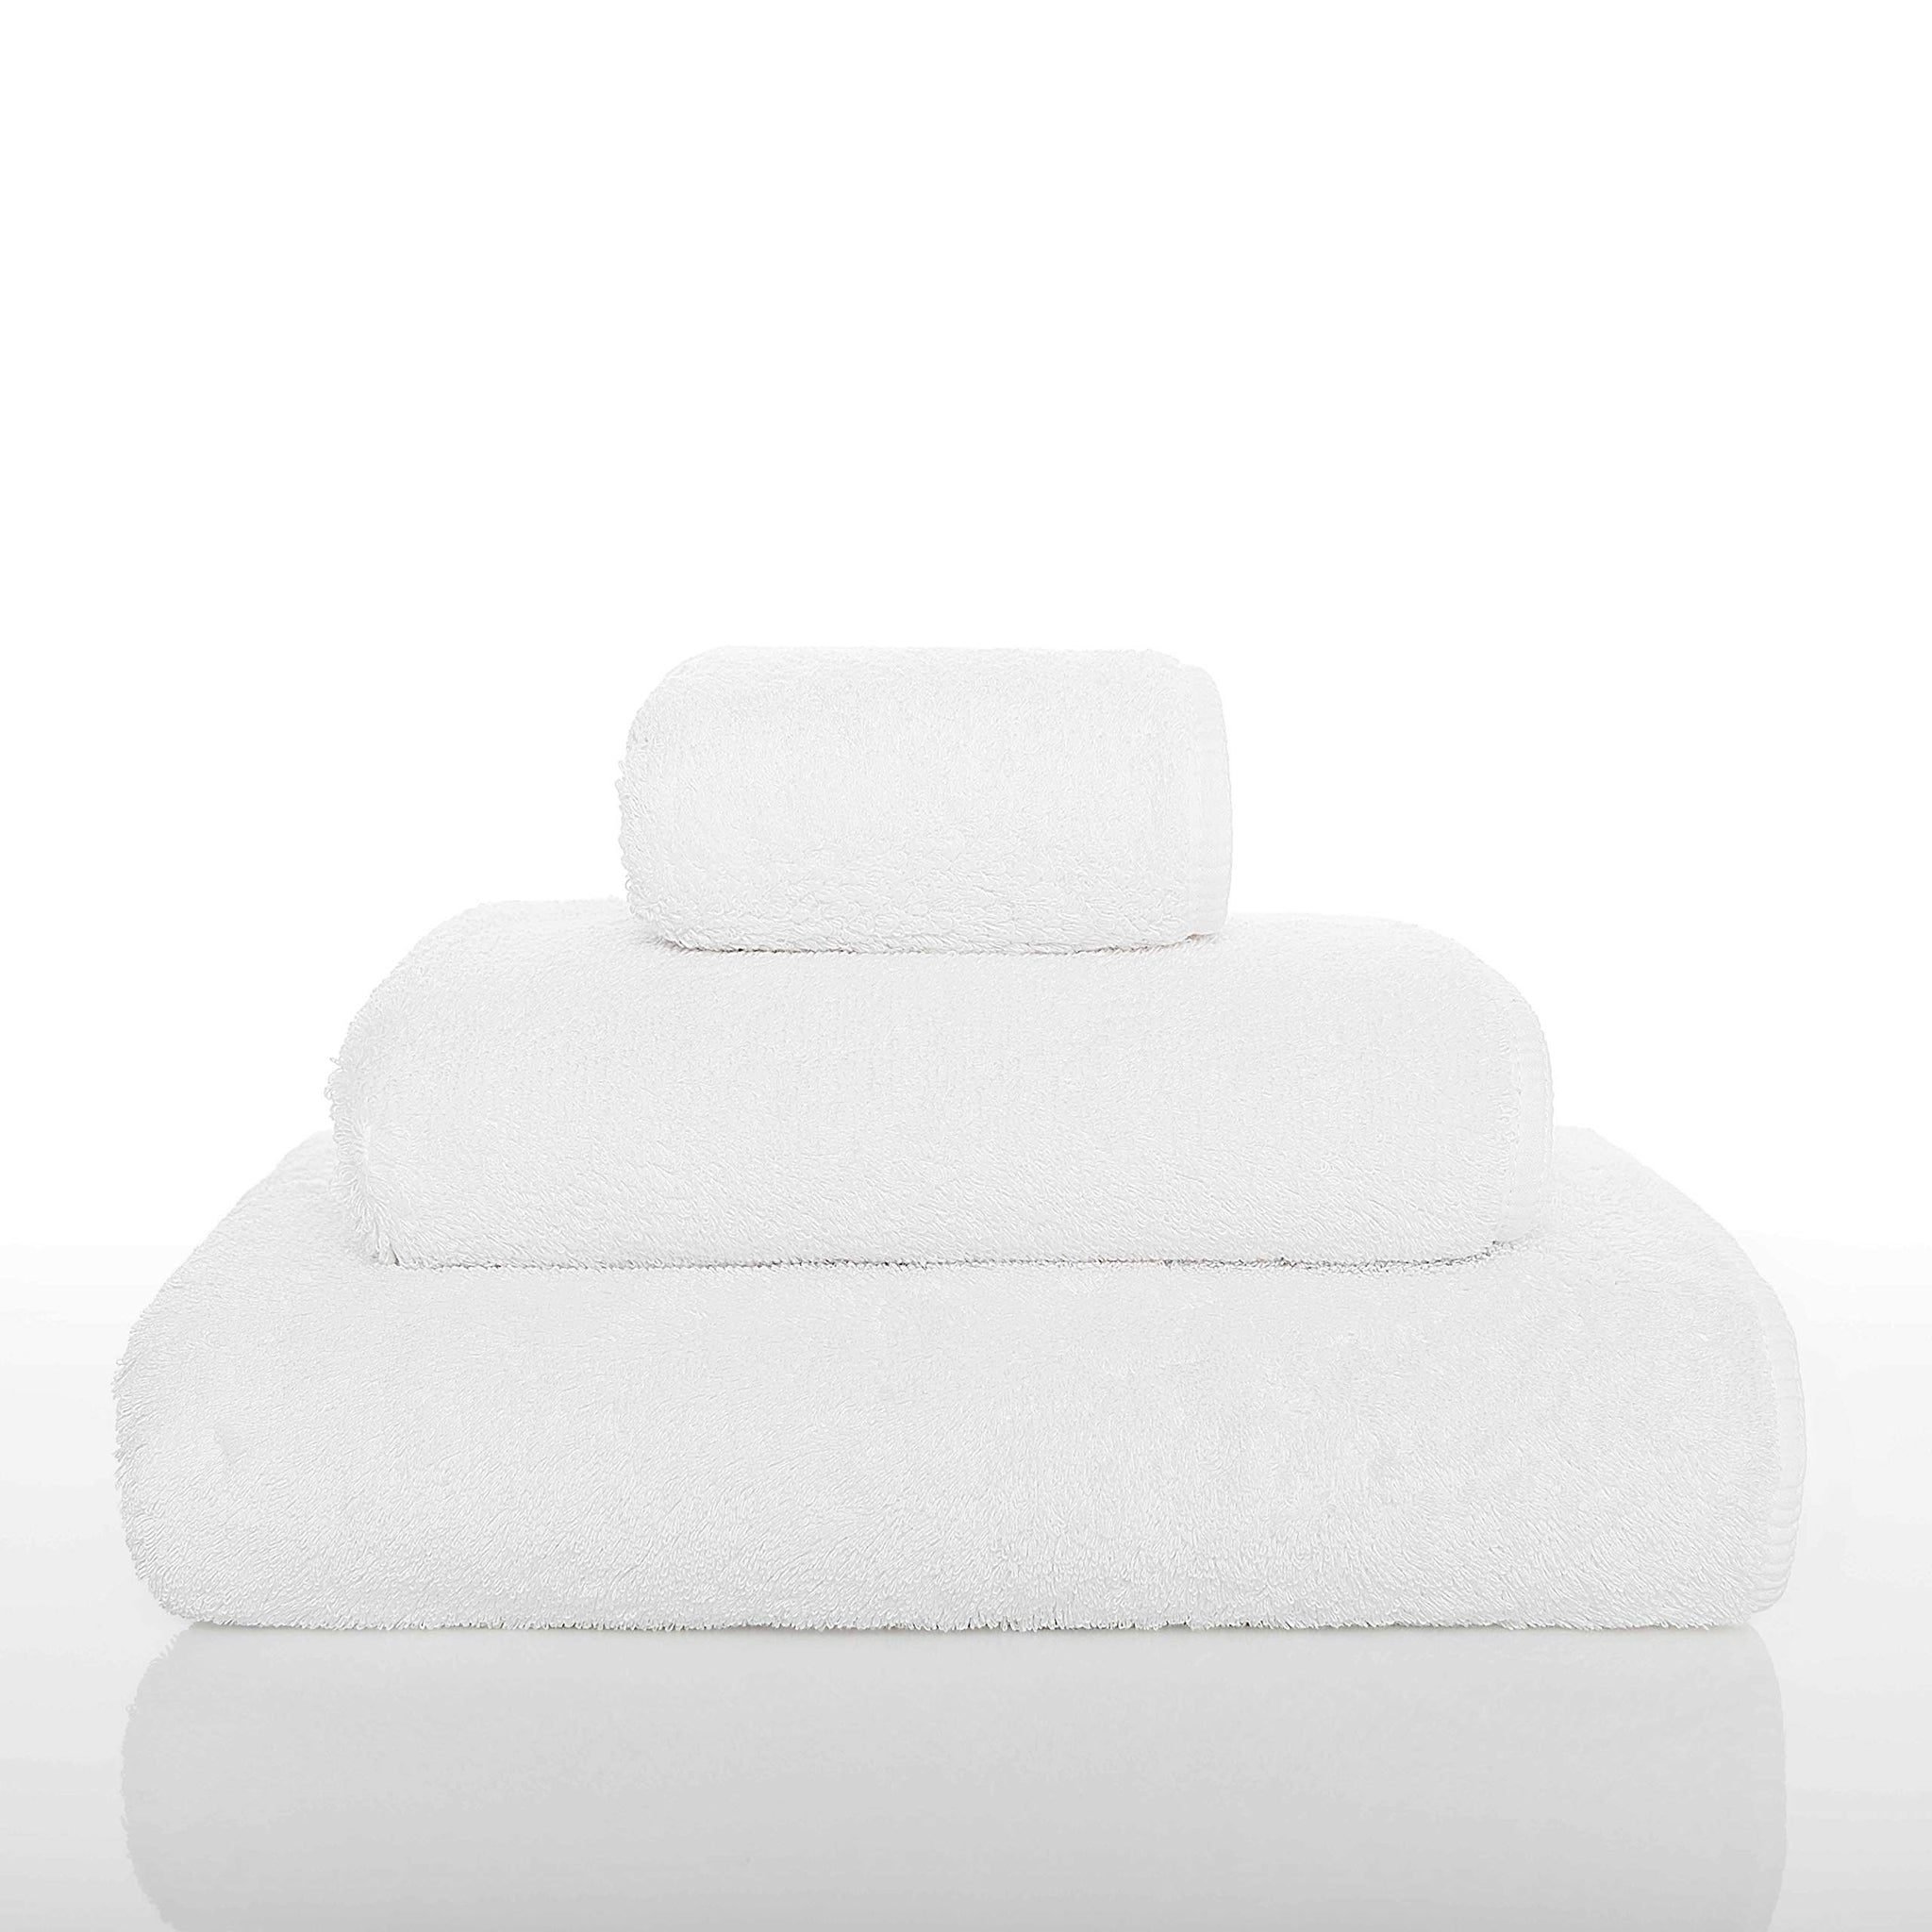 Graccioza Long Double Loop Towels Wash Cloth (12'' x 12", White), 100% Egyptian Cotton 700 GSM - Elegant, Soft Body and Face Towel Bath Linens Made in Portugal.